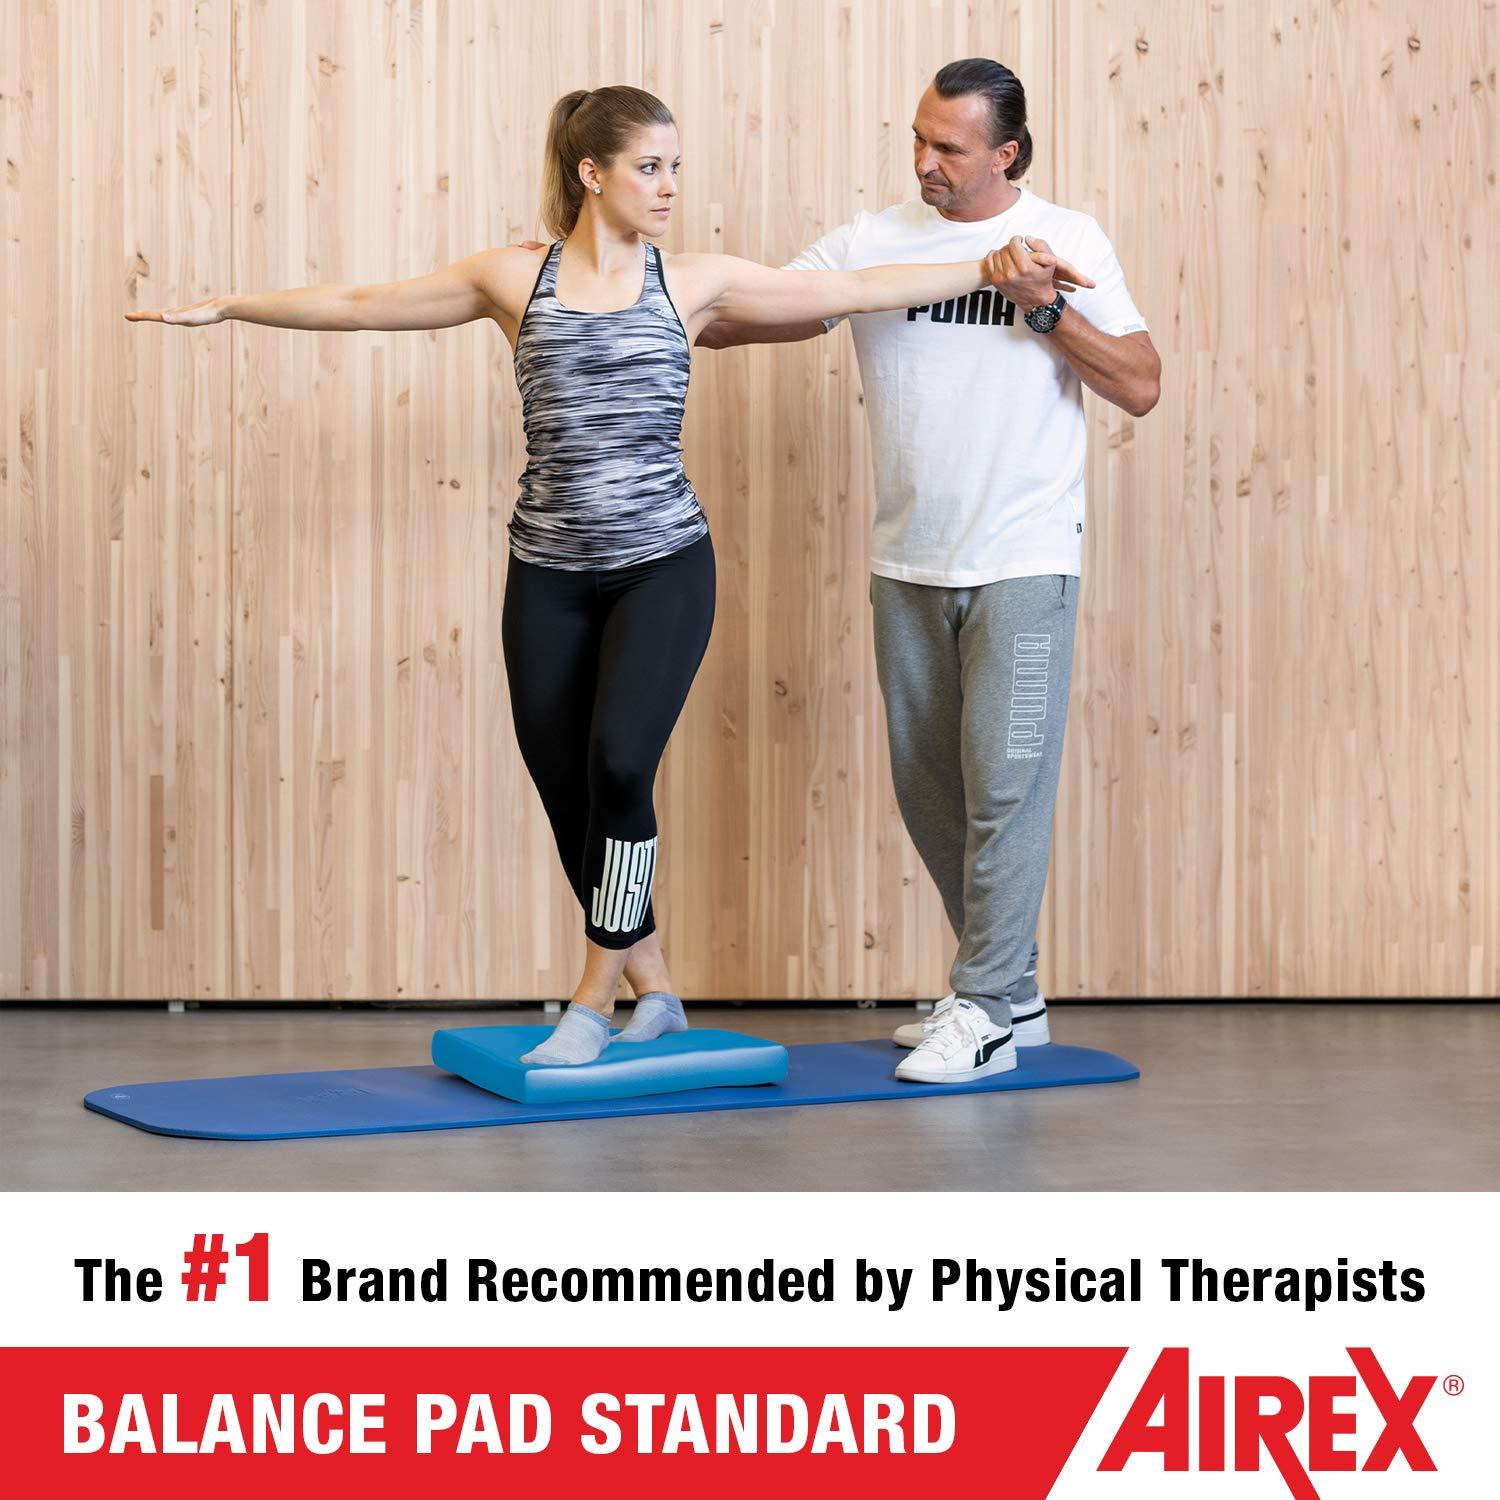 AIREX Elite Gym Exercise Foam Balance Pad for Gym Stretching and